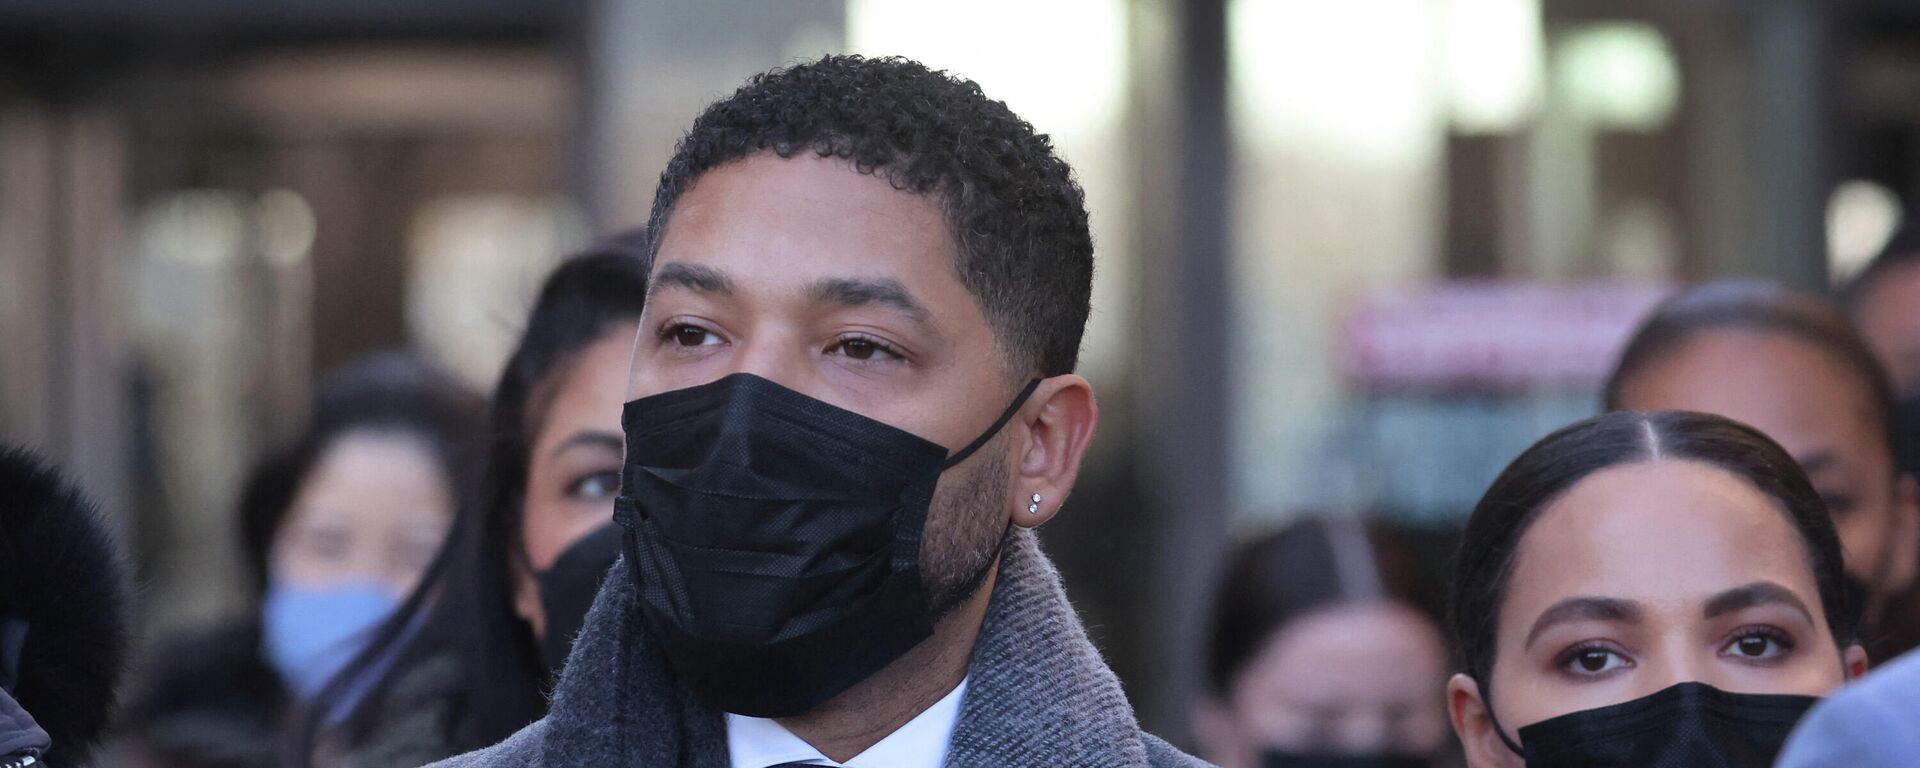 Former Empire actor Jussie Smollett leaves the Leighton Criminal Courts Building as the jury begins deliberation during his trial on December 8, 2021 in Chicago, Illinois. - Sputnik International, 1920, 11.12.2021